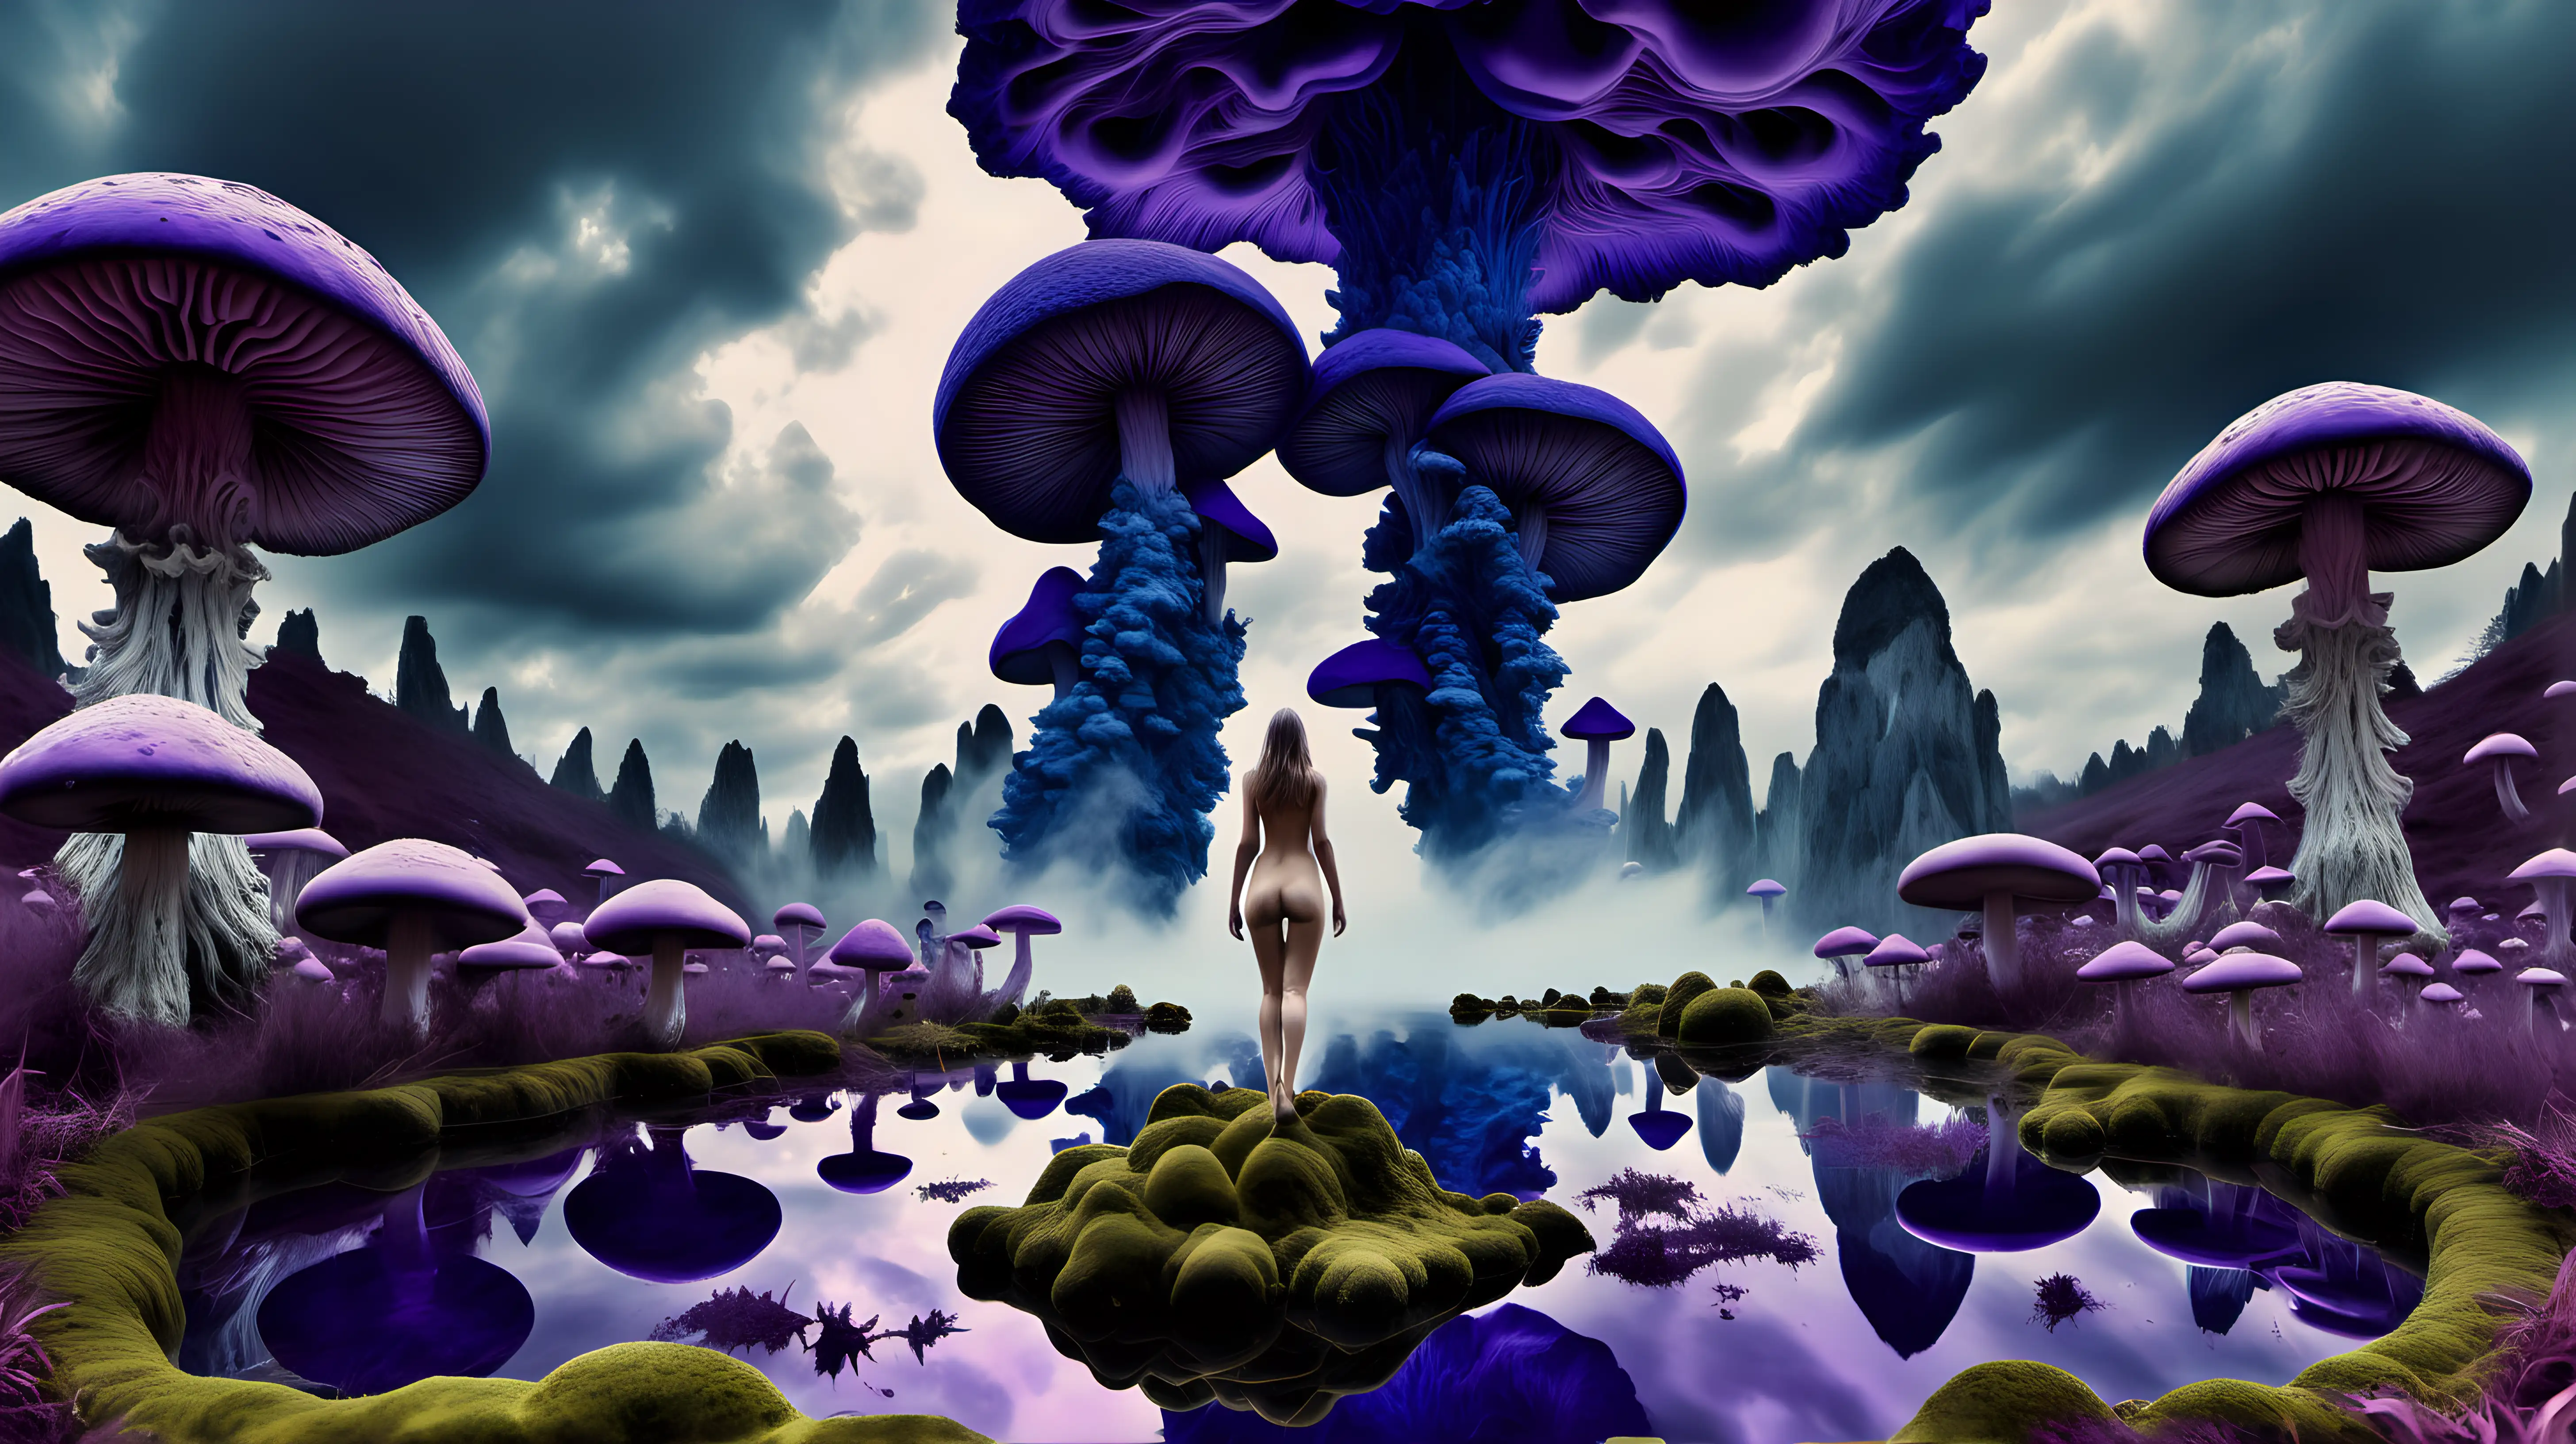 Psychedelic landscape, crystalline purplish indigo mineral clouds, with nude woman ascending up into the sky, Moss, massive mushrooms, and water on the ground, taken with DSLR camera, vast, realistic lighting